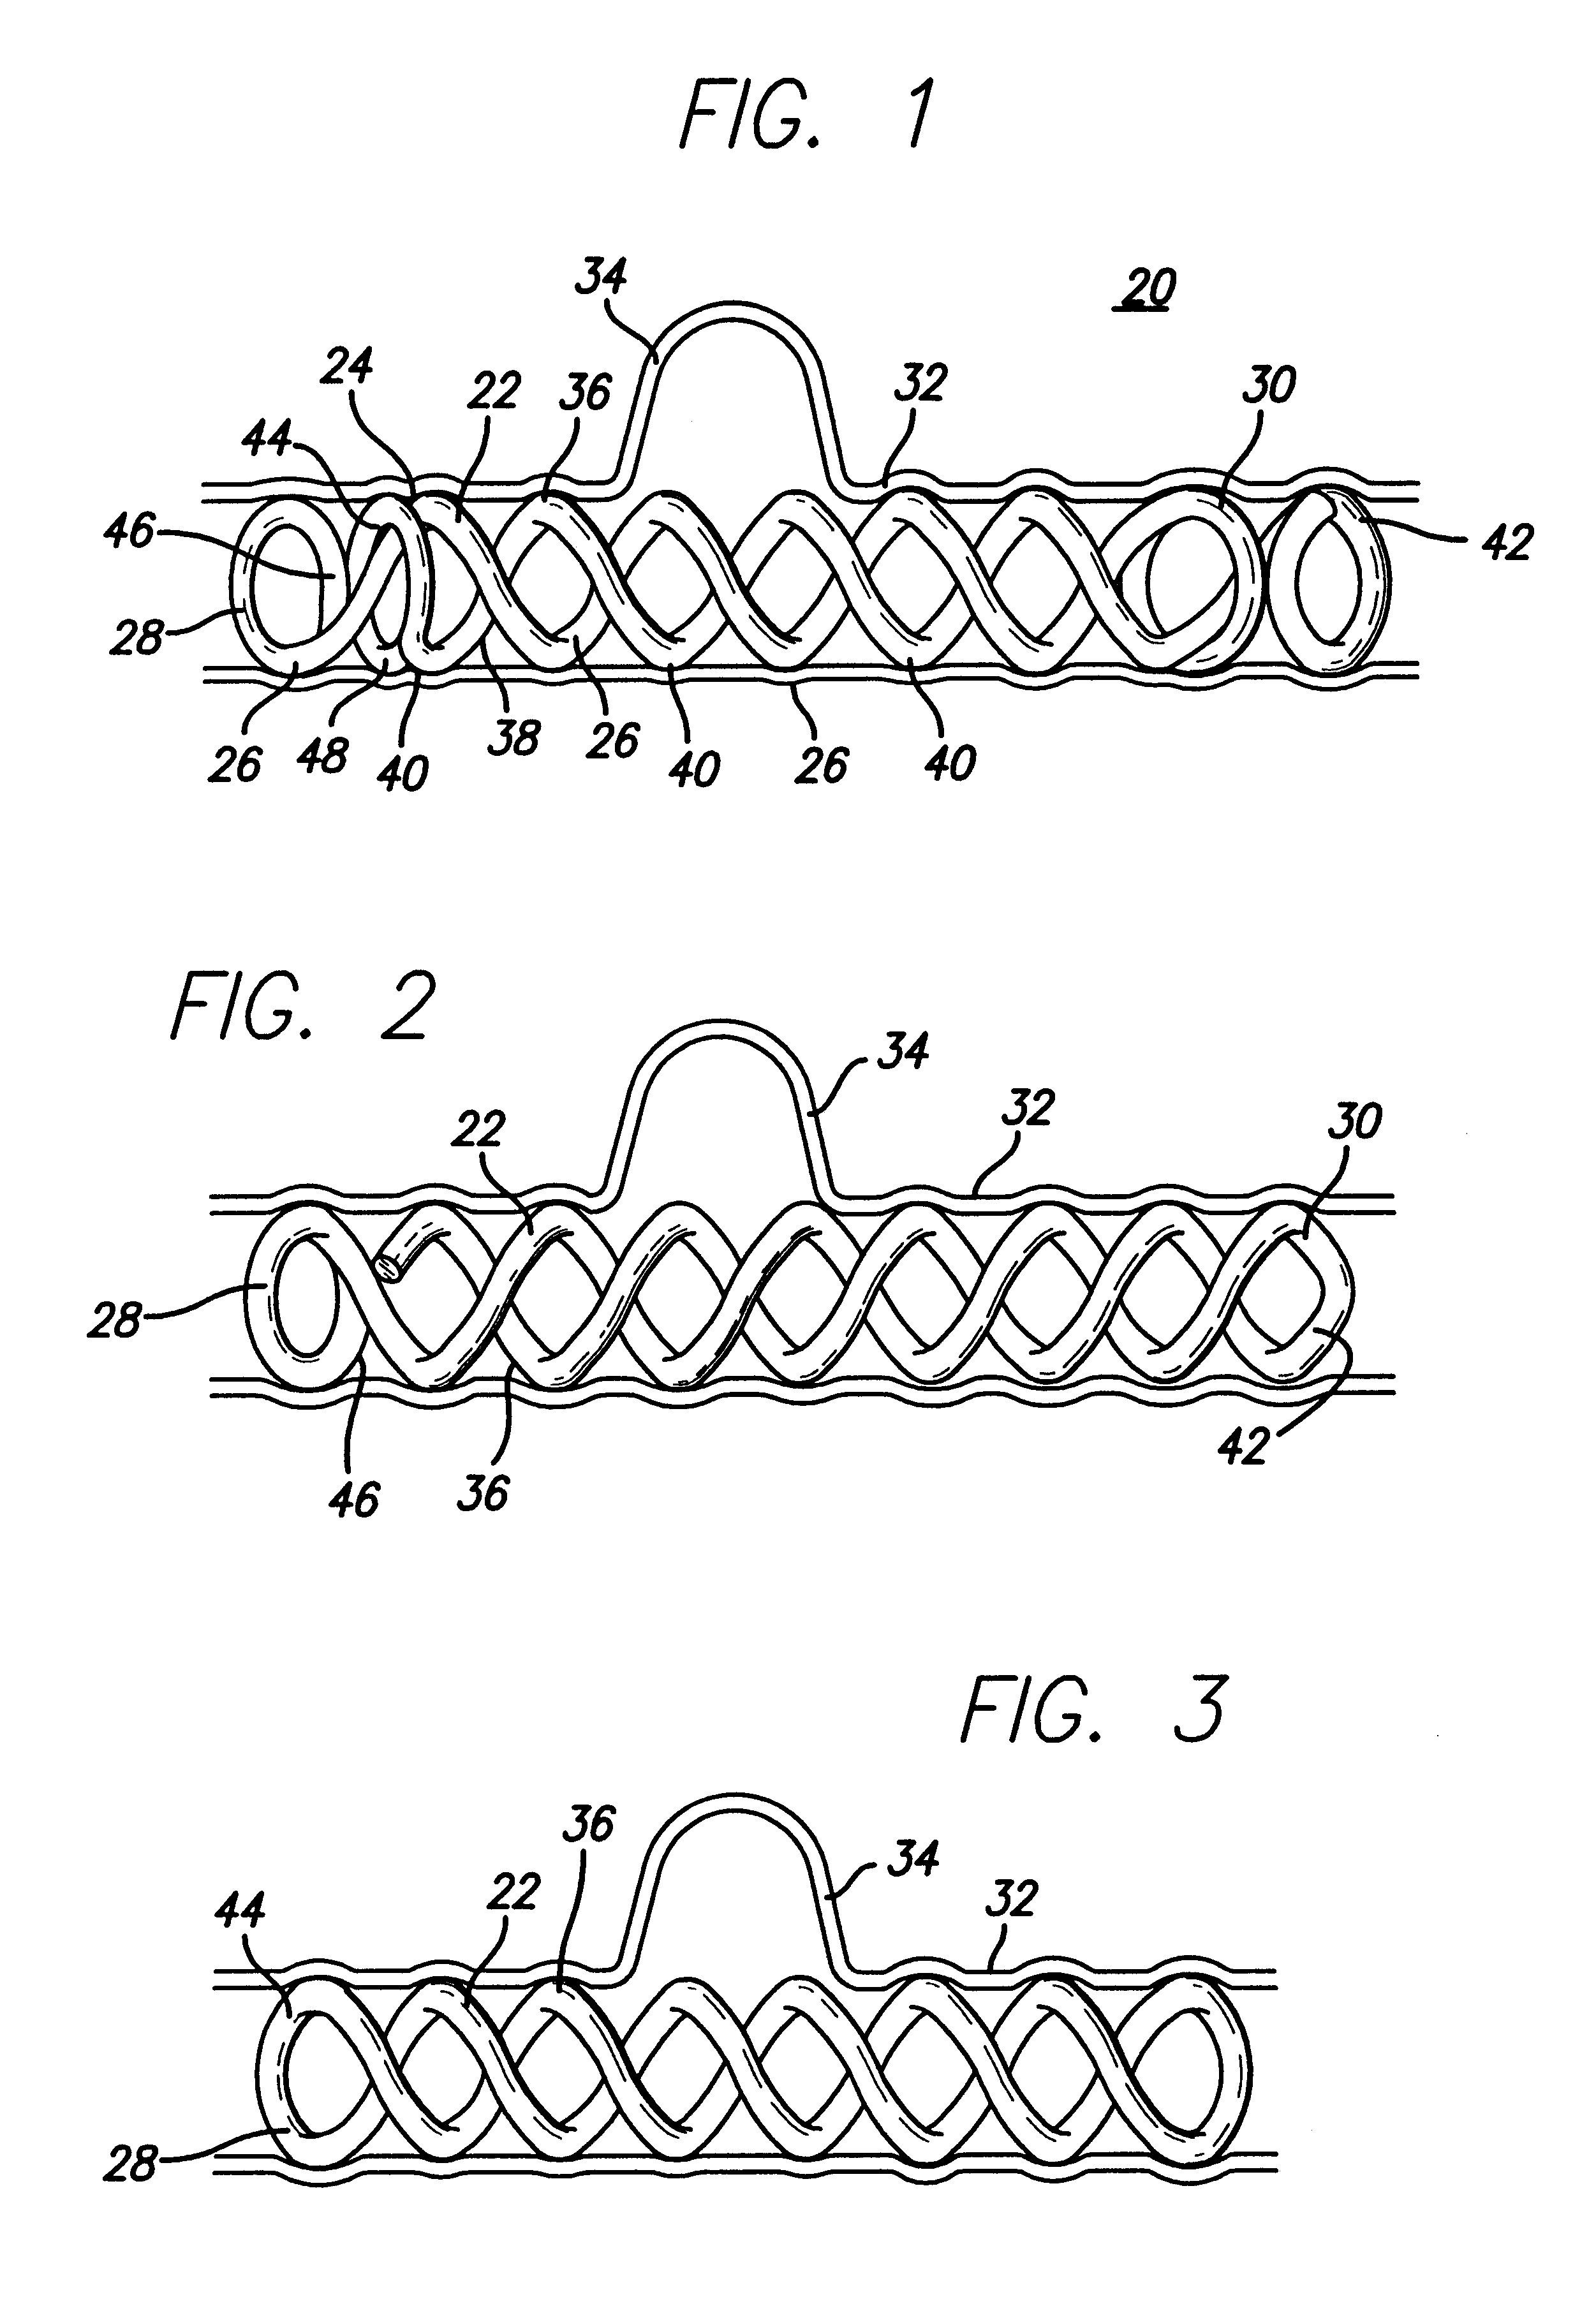 Insitu formable and self-forming intravascular flow modifier (IFM) and IFM assembly for deployment of same